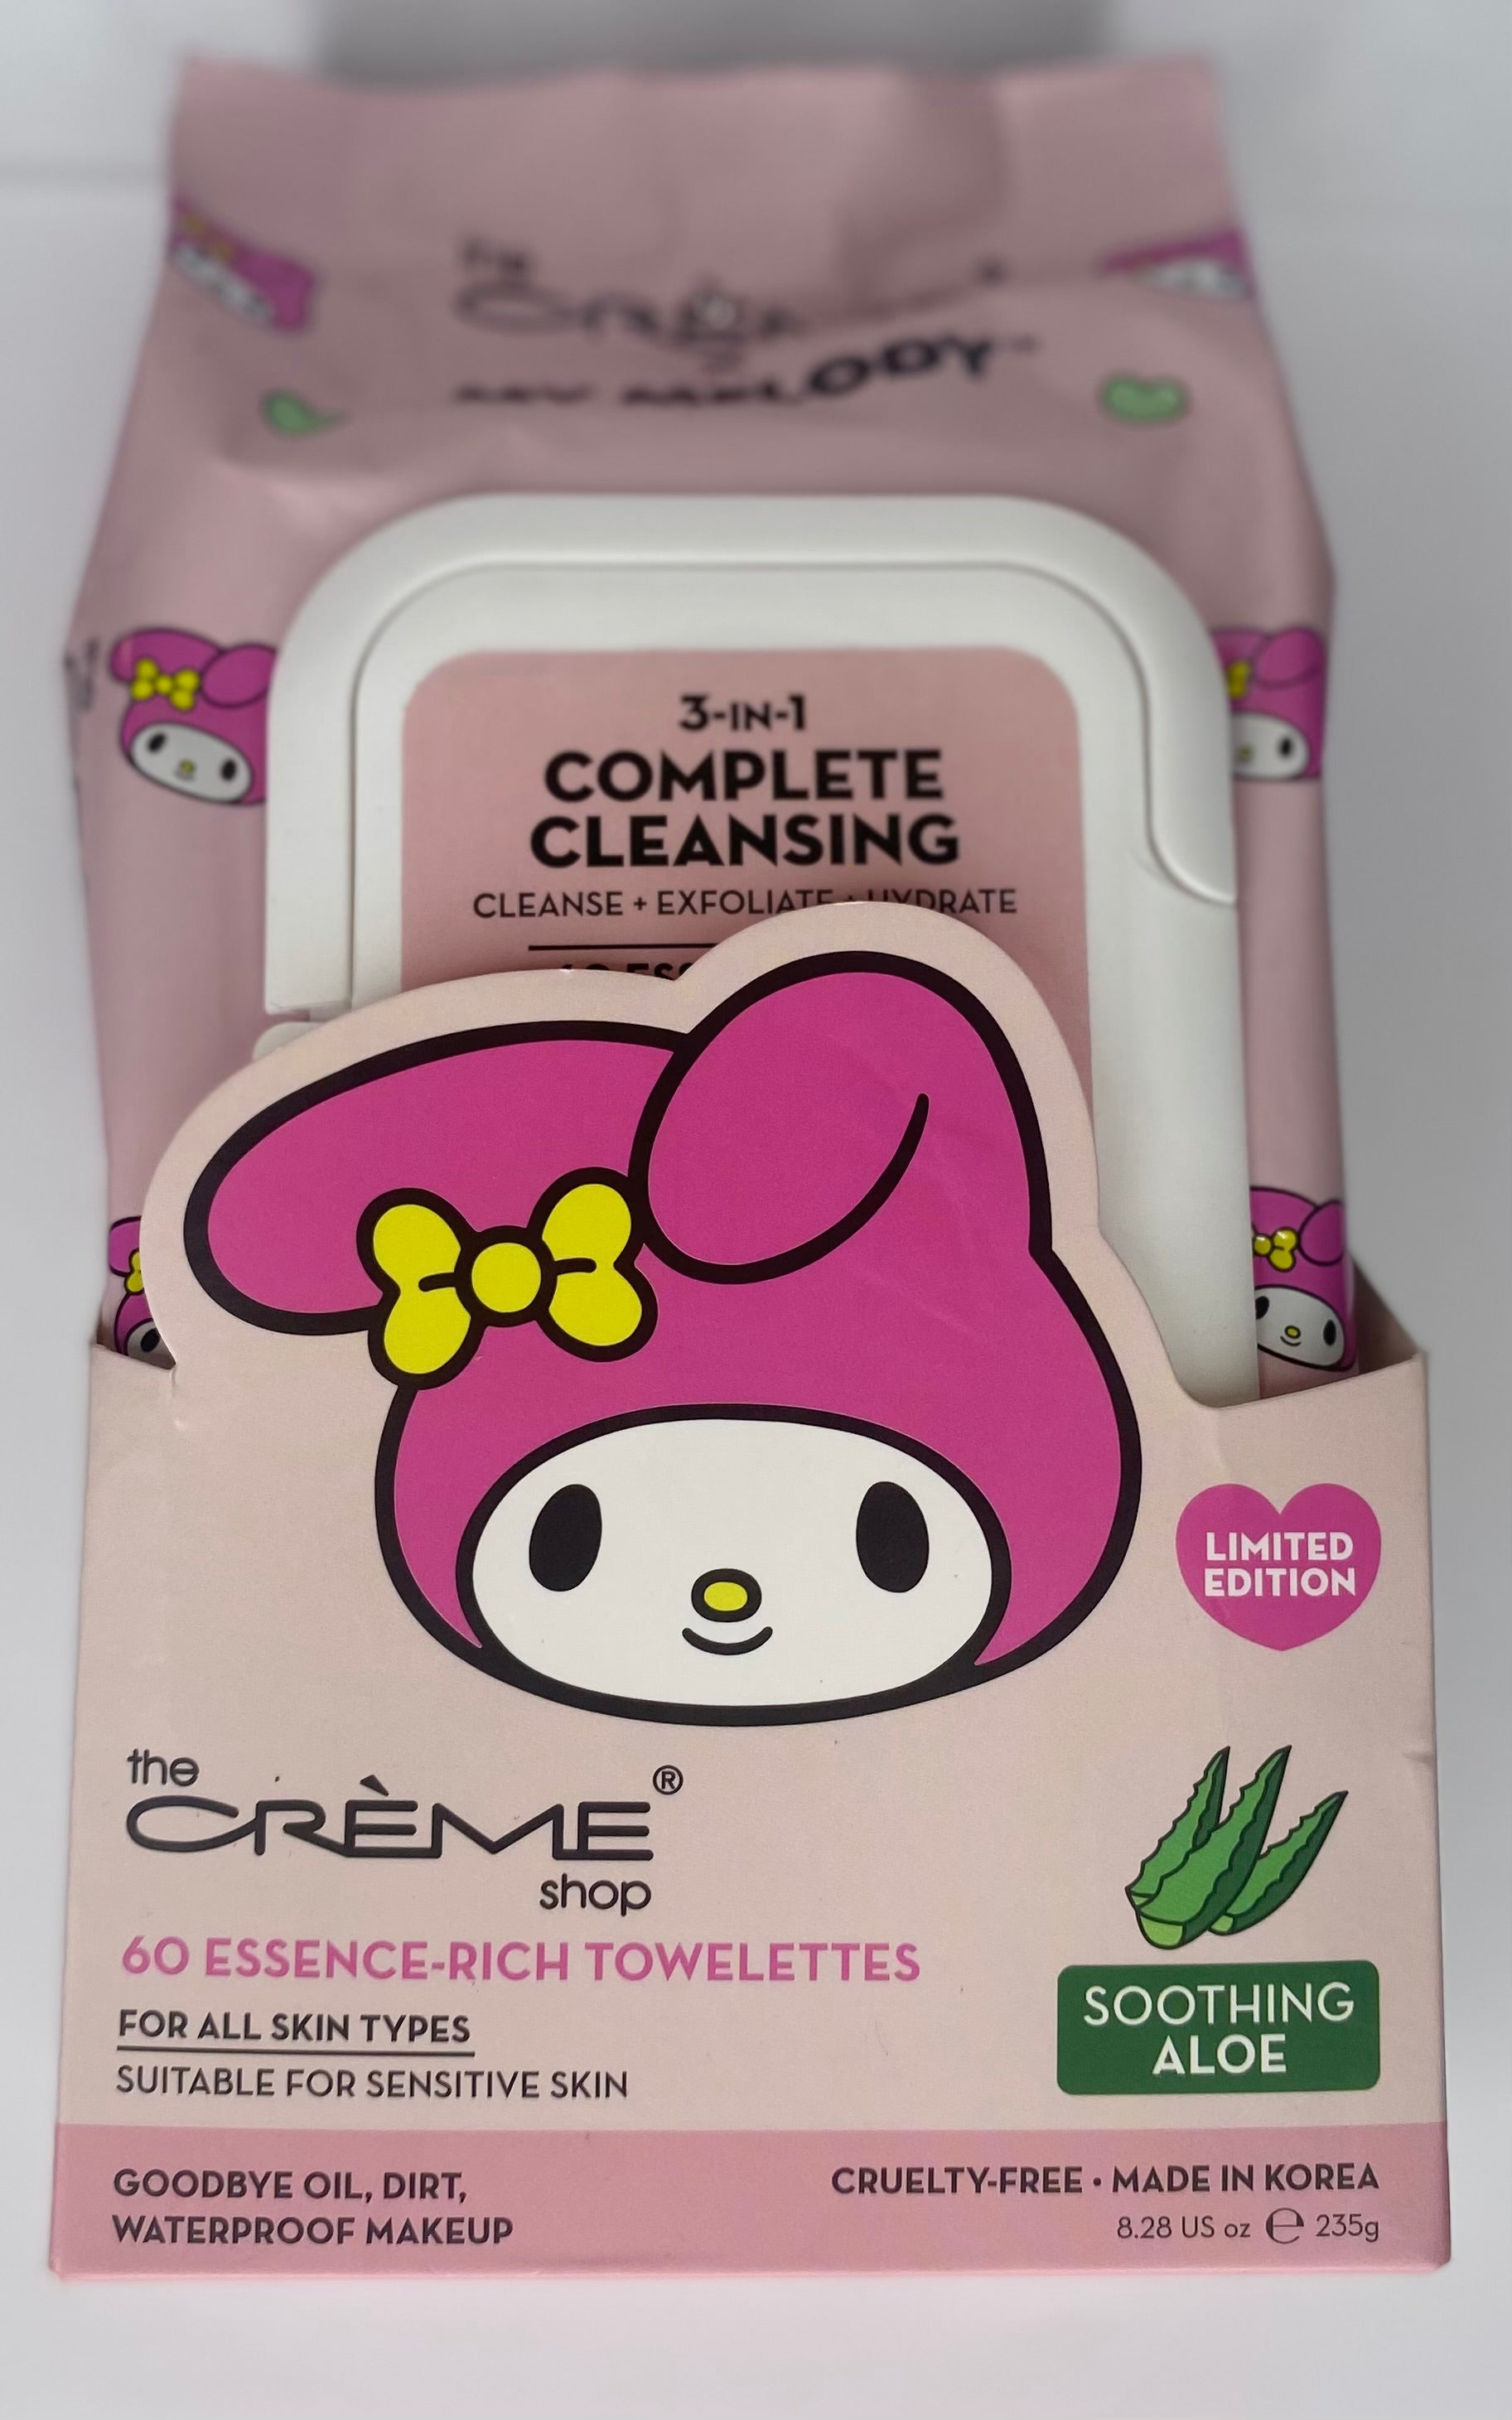 My Melody 3-IN-1 Complete Cleansing Essence-Rich Towelettes